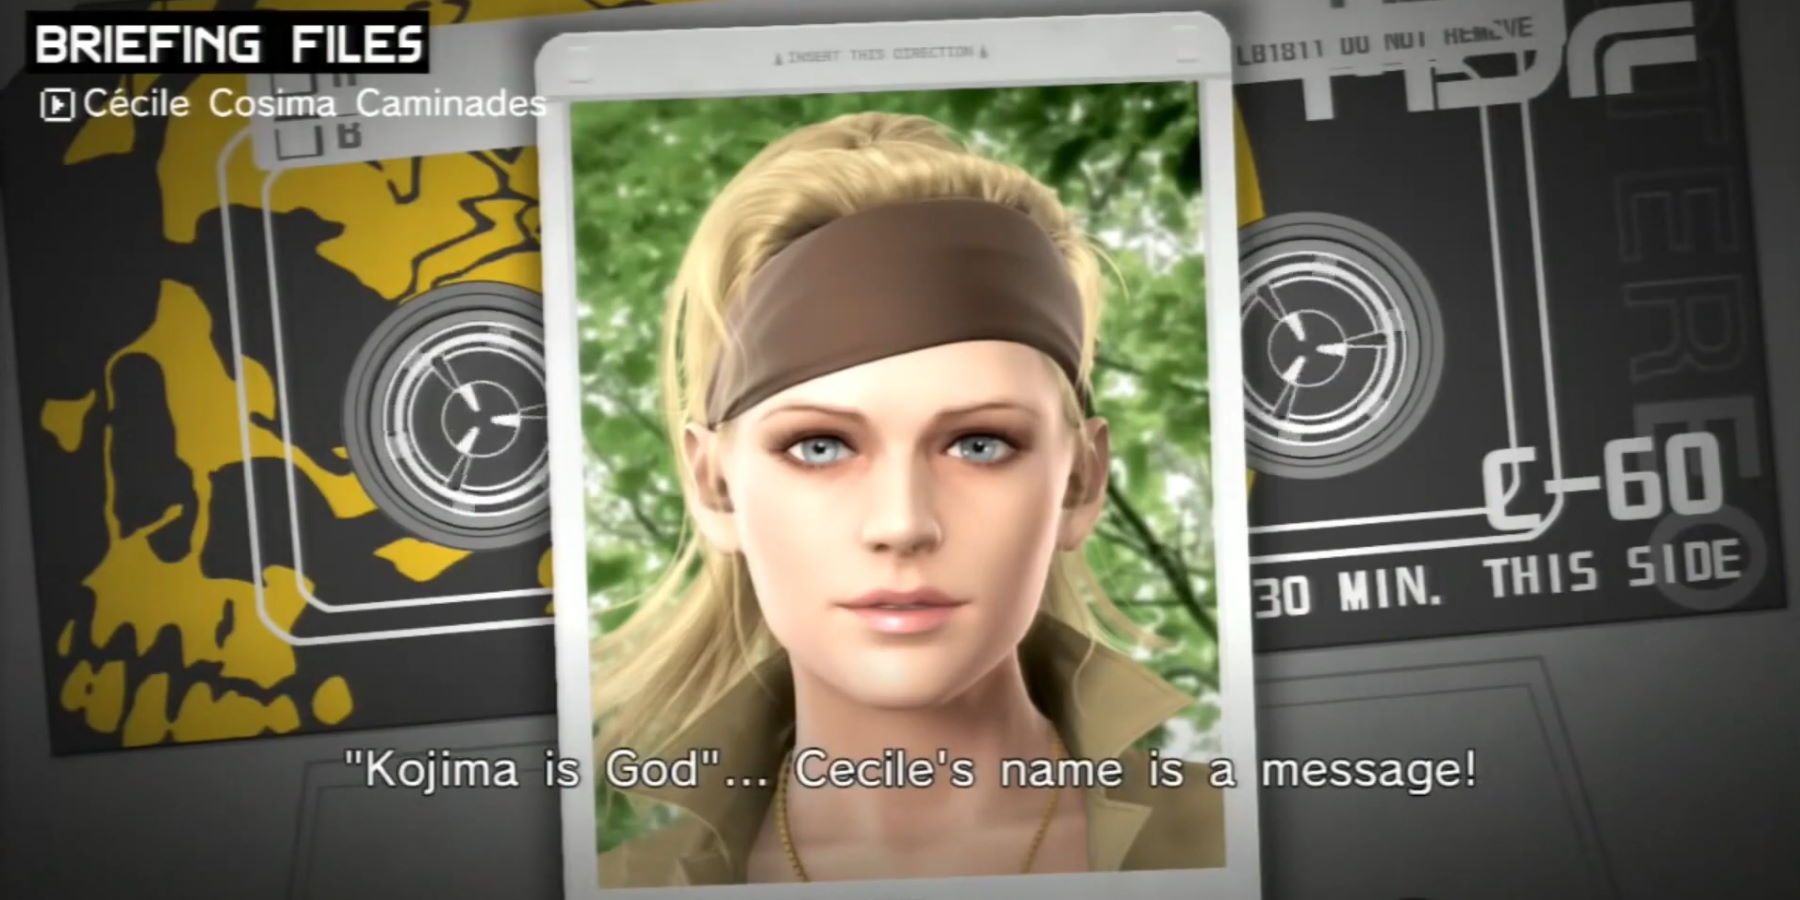 A tape with the MSF logo on it and a picture of Cecile Cosima Caminades in front. Subtitles say '"Kojima is God" ... Cecile's name is a message!"